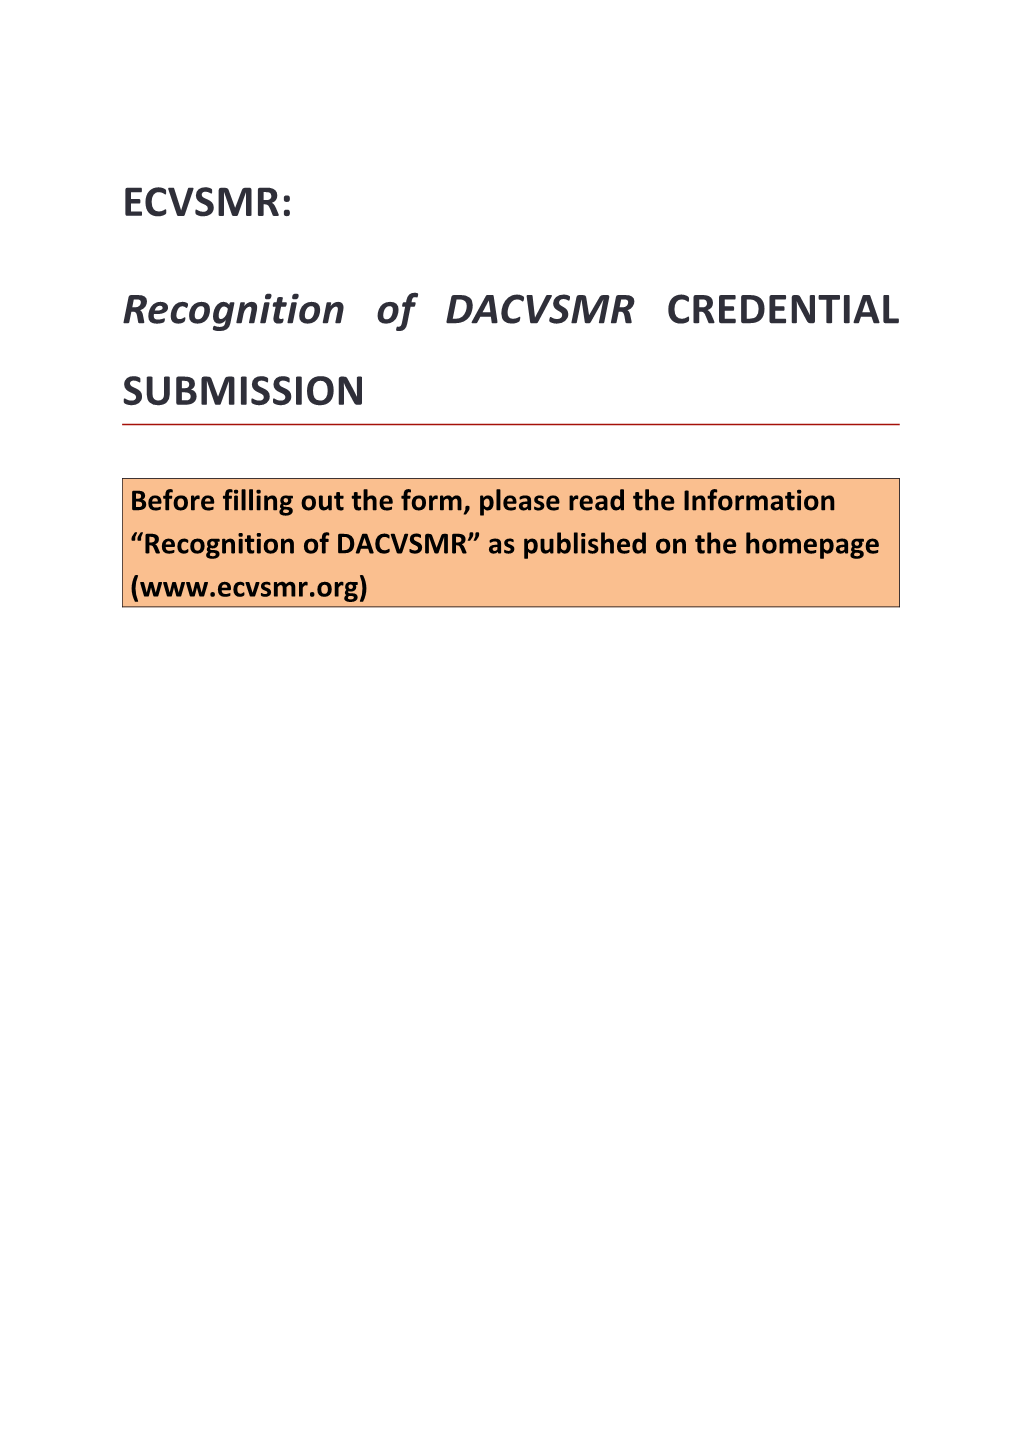 Recognition of DACVSMR CREDENTIAL SUBMISSION